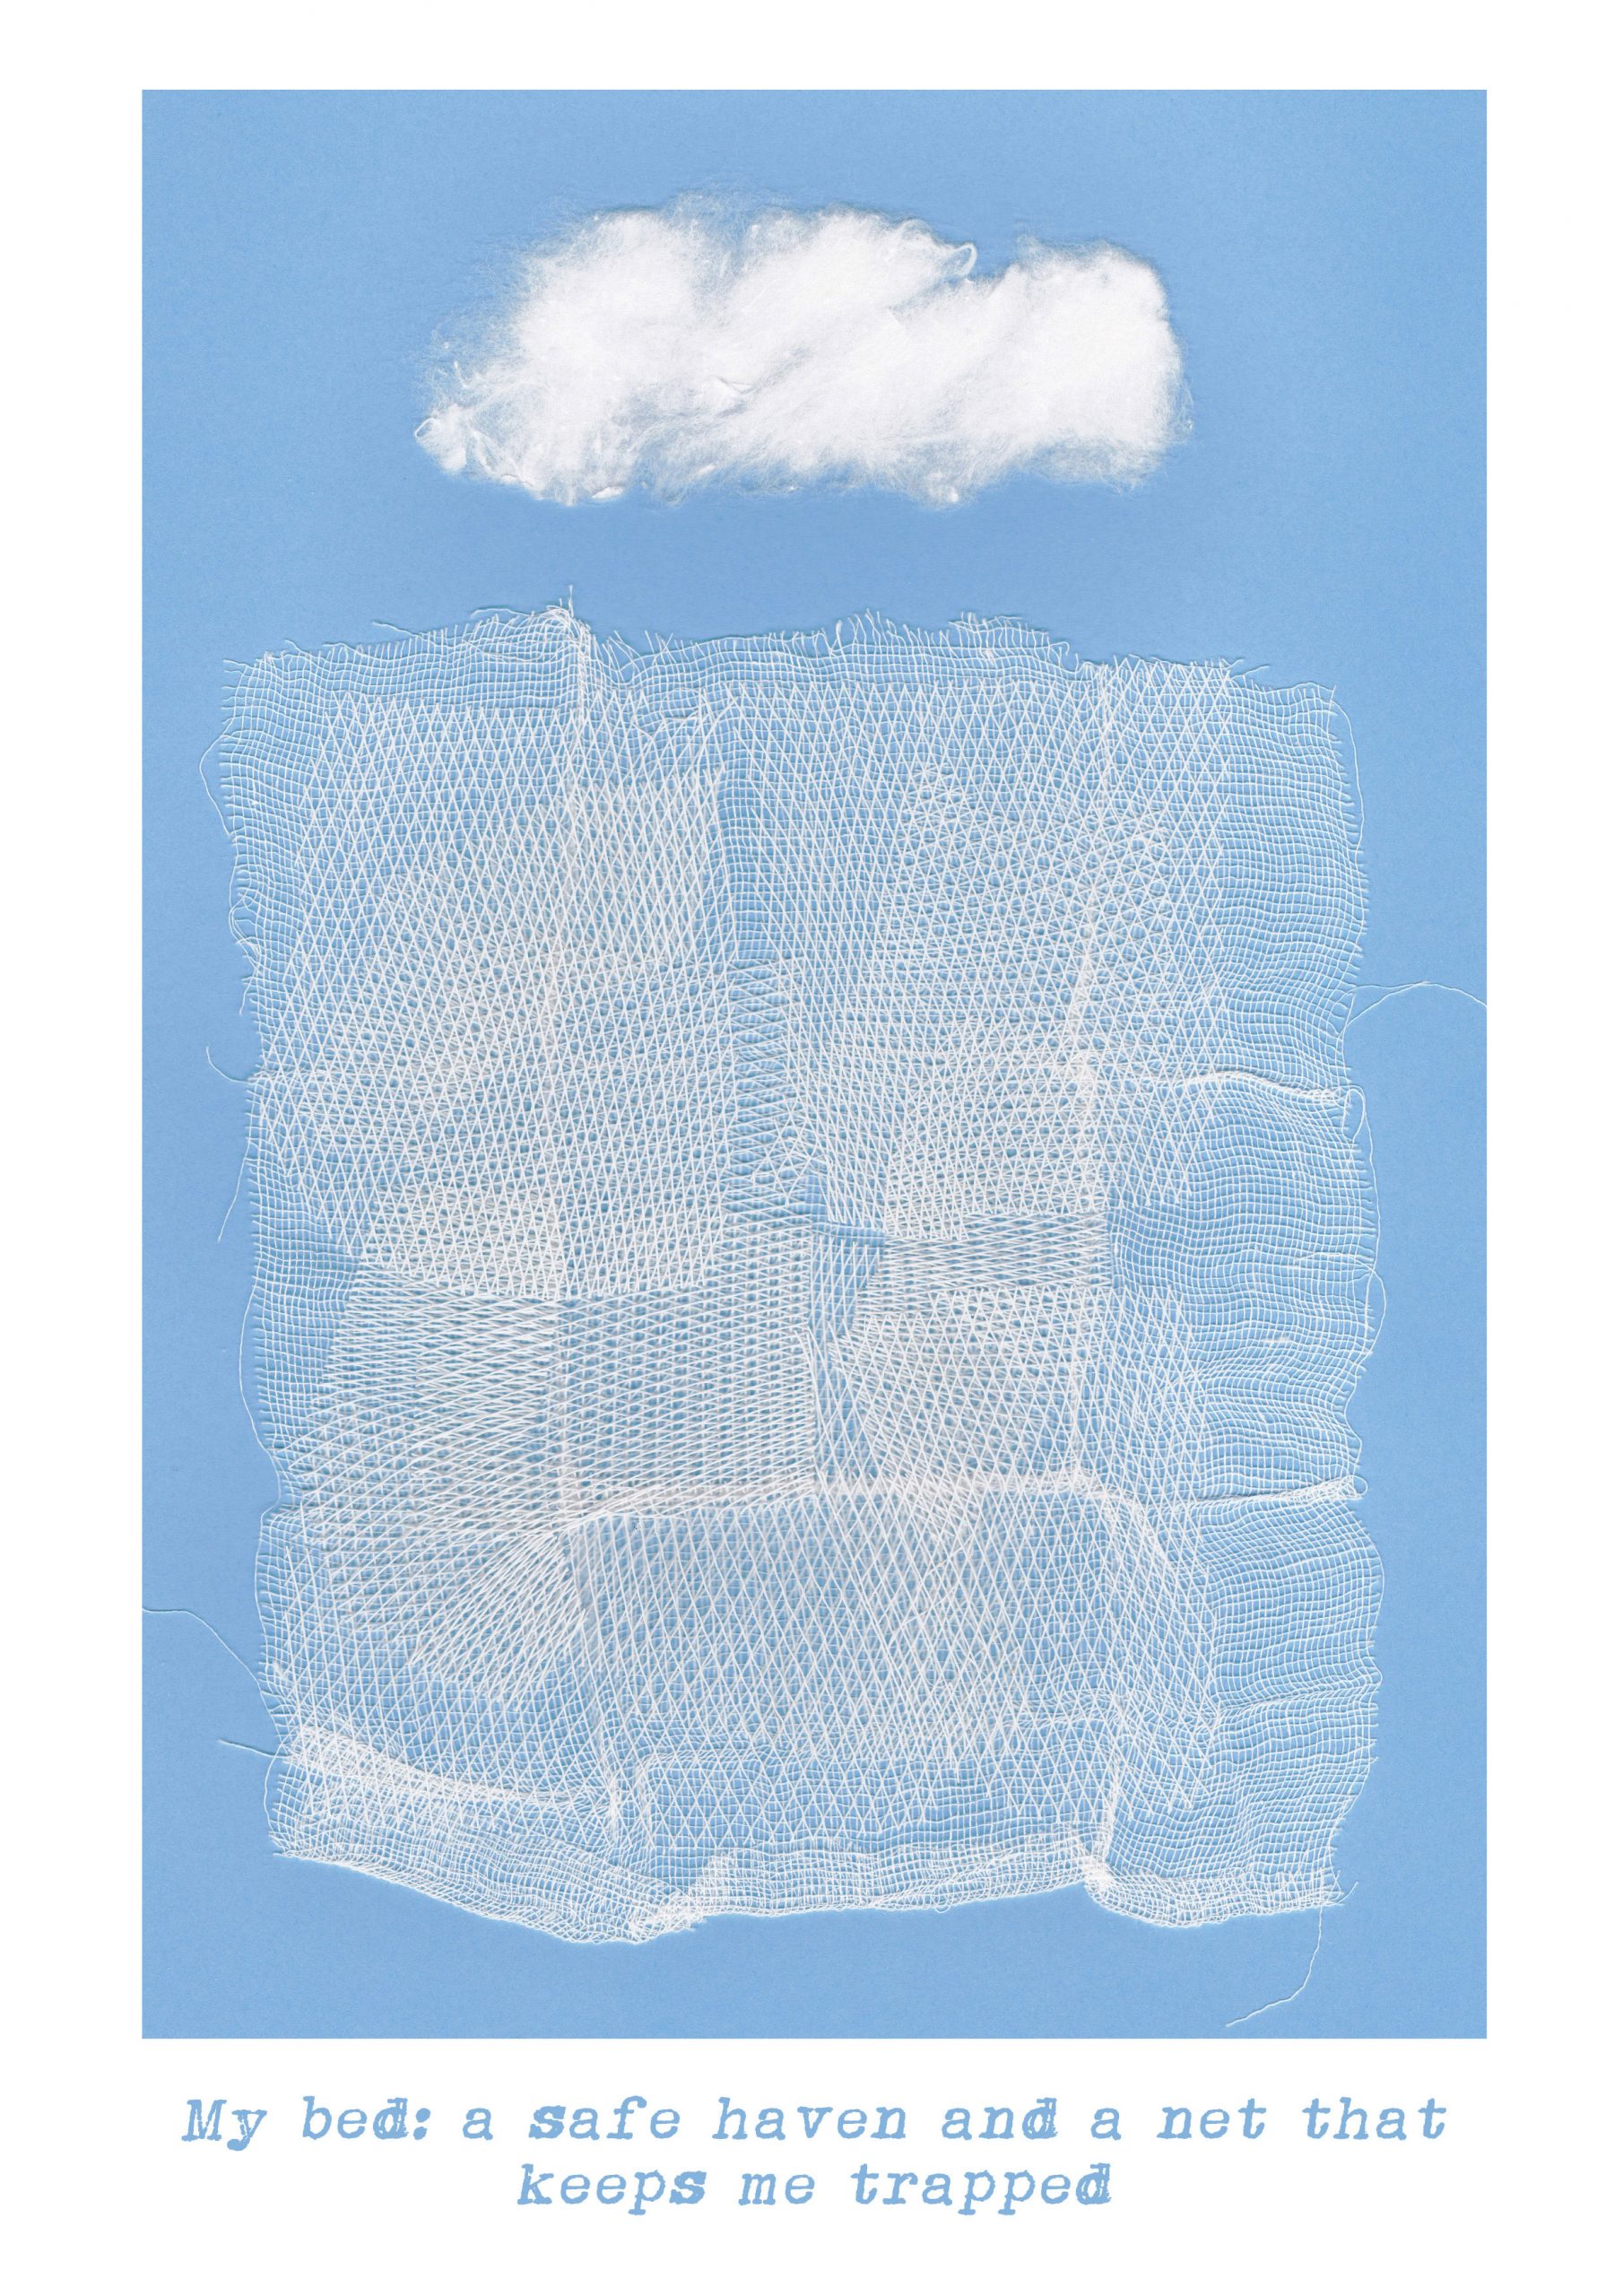 A mixed media collage in portrait format surrounded by a white border. On the pale blue background sits a piece of cloud shaped cotton wool above a square of white netting. The bottom edge of the white border contains the words: “My bed: a safe haven and a net that keeps me trapped.”